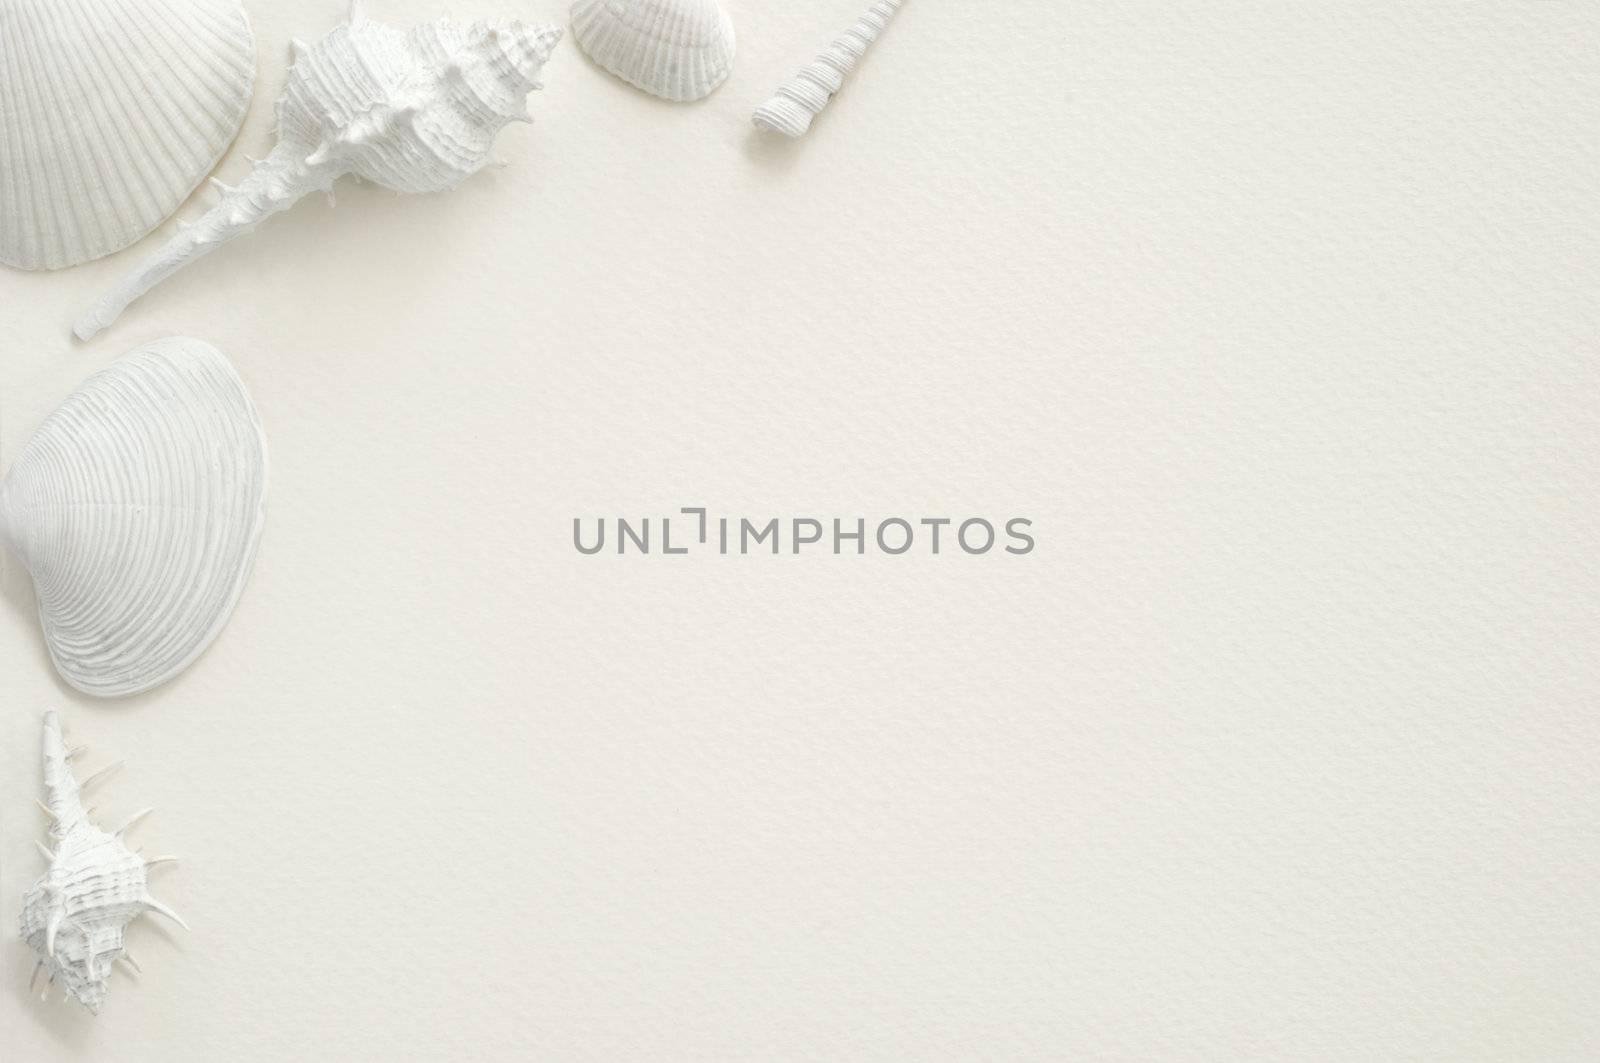 White seashells presented on a white sheet of watercolor textured paper offering a framing format